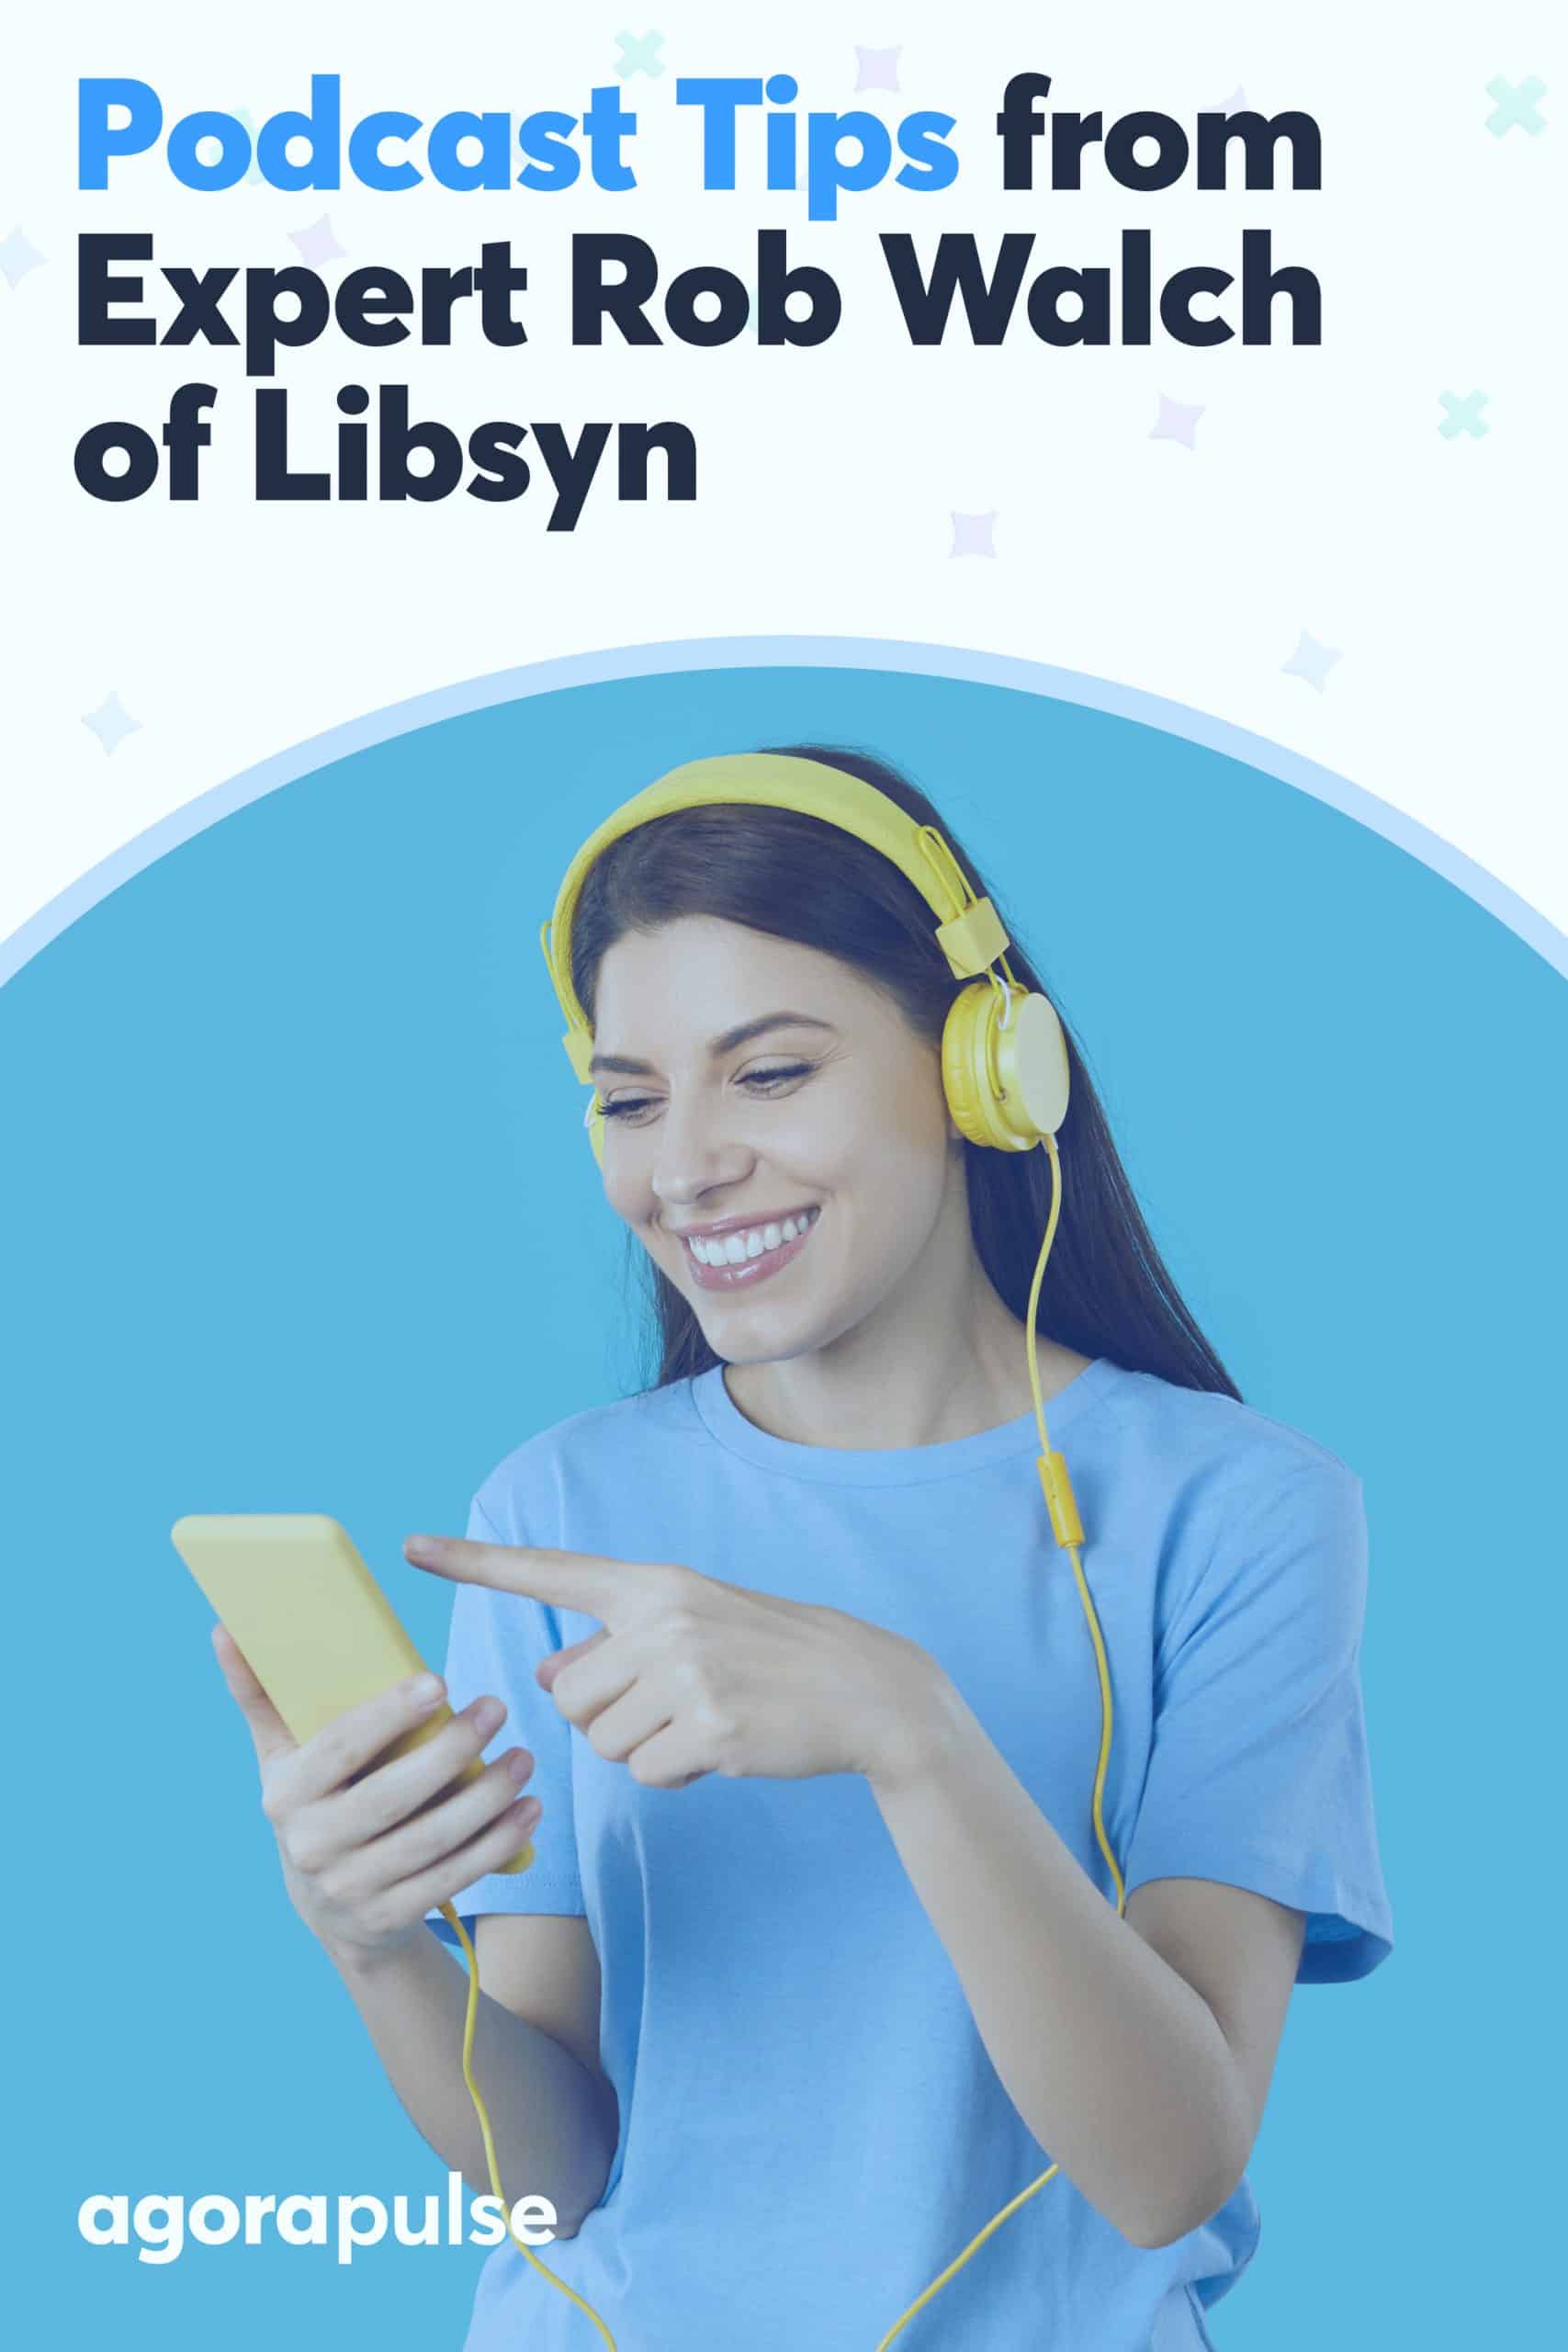 Podcast Tips from Expert Rob Walch of Libsyn to Make You Break Out Your Microphone